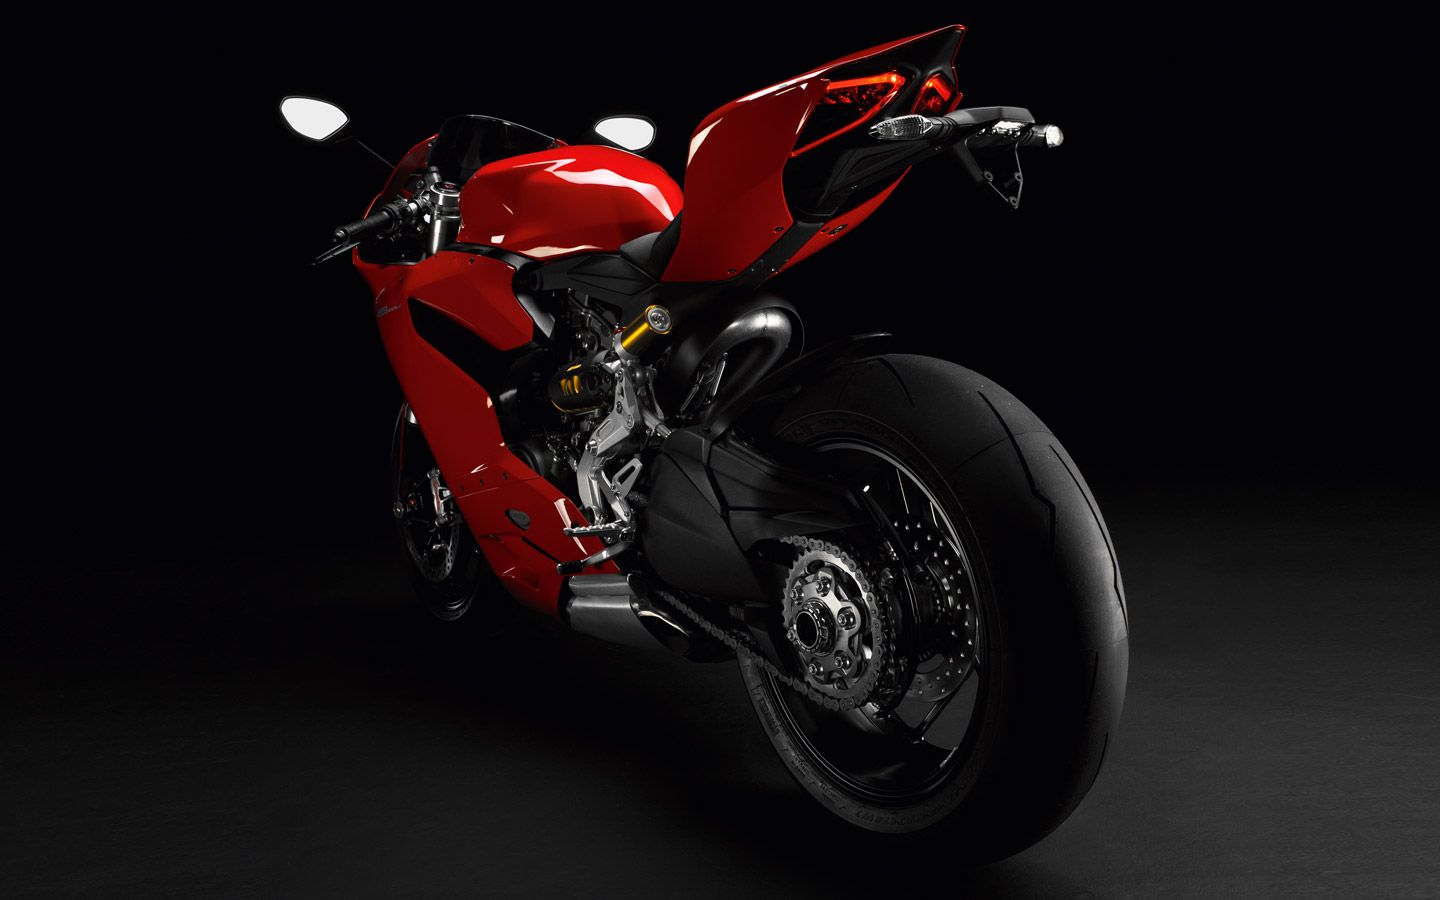 Ducati 1199 Panigale S Wallpaper Ideas 8618 Hd Wallpapers | ibwall.com